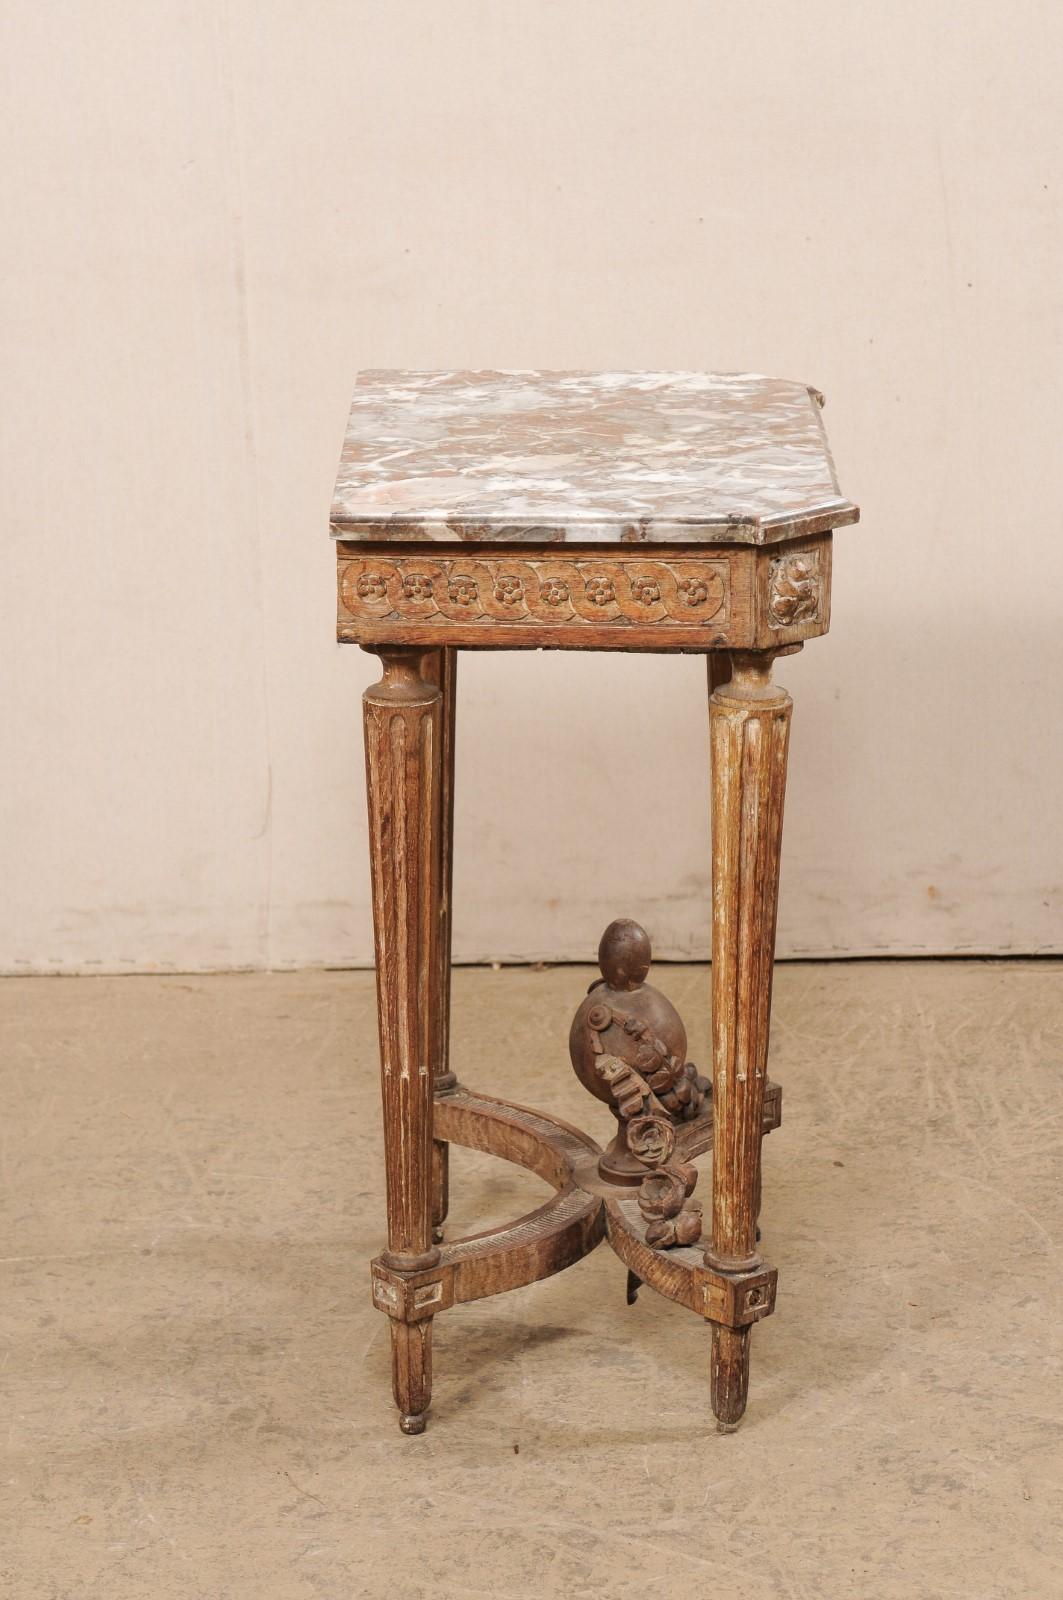 French Antique Beautifully-Carved Petite Marble-Top Table w/ Interesting History For Sale 2